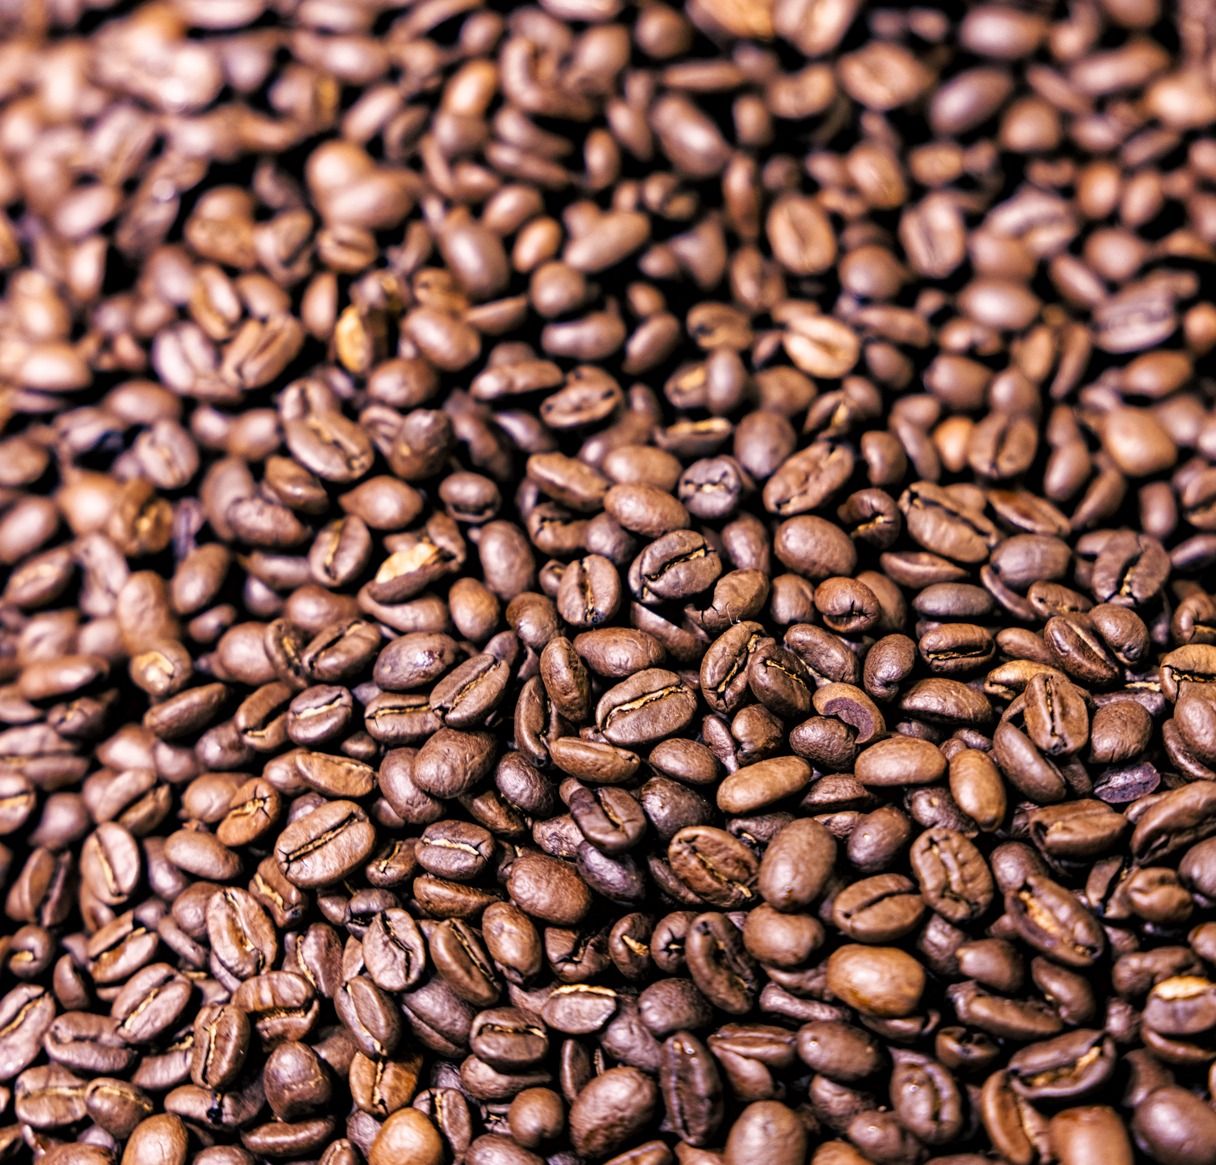 Blue-Mountain-roasted-coffee-beans